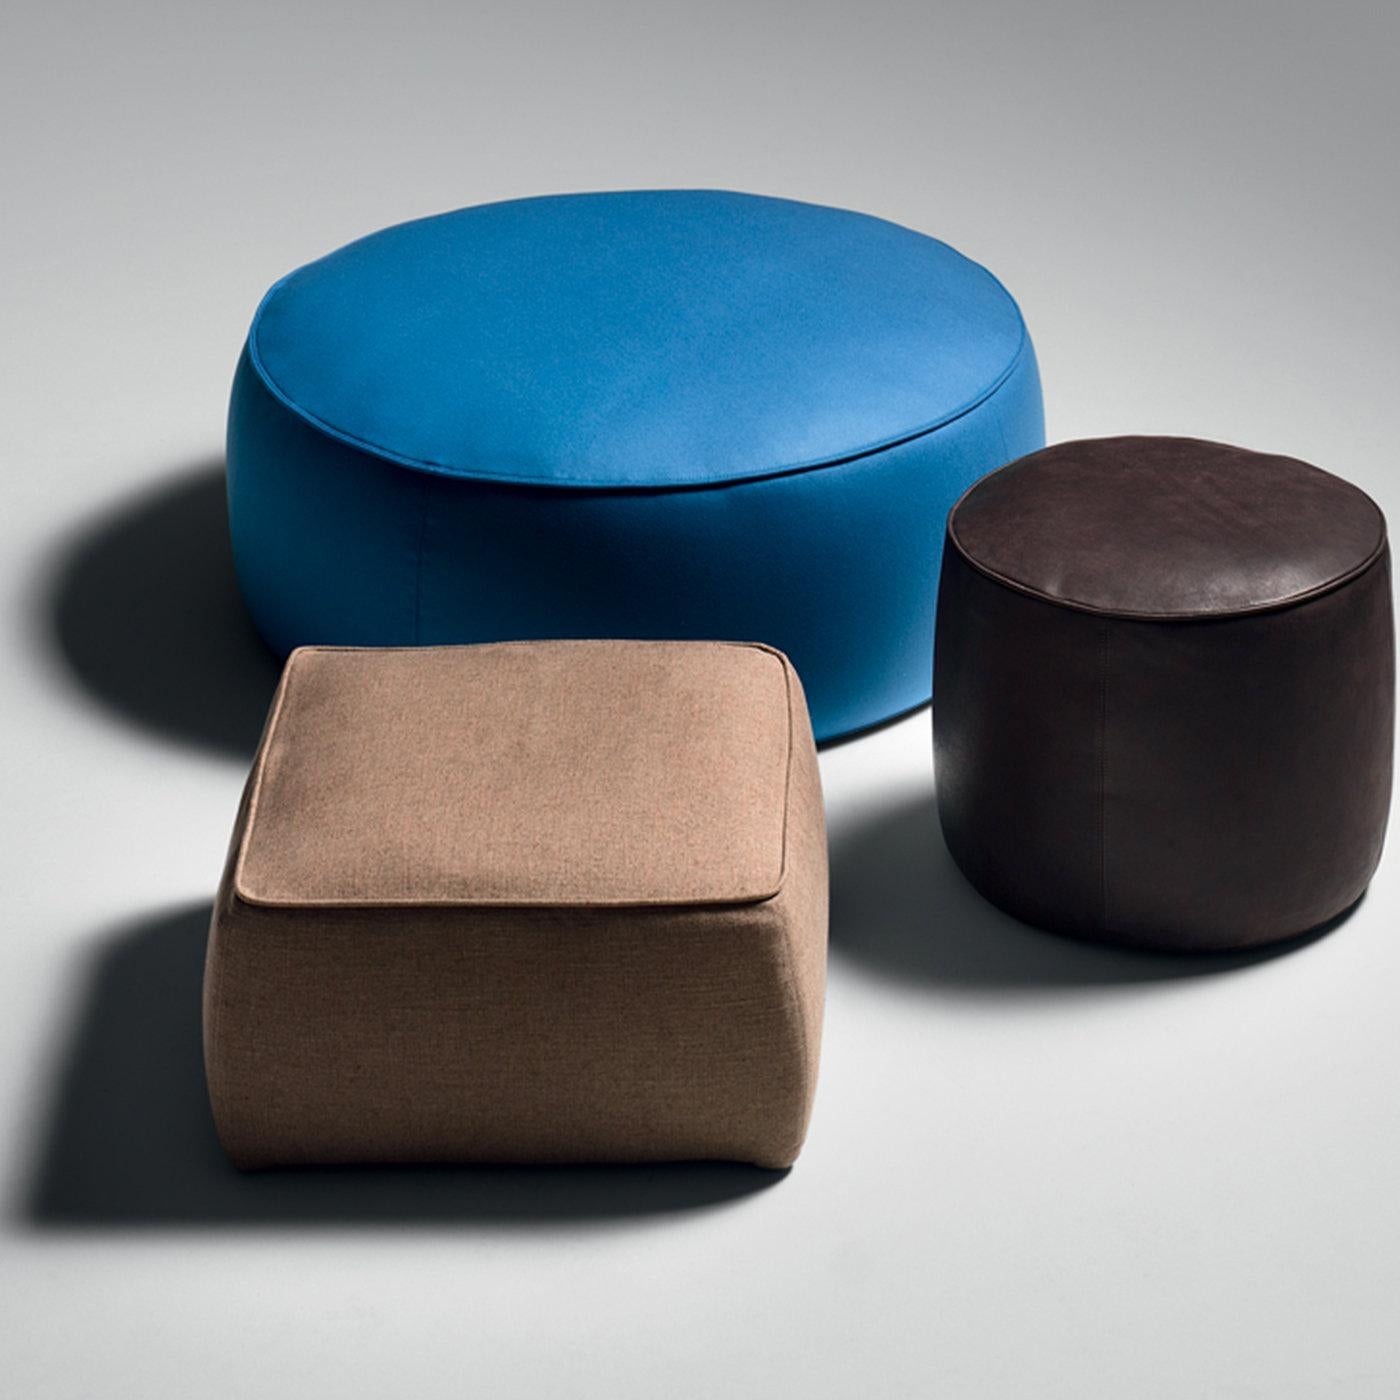 The shape and neutral colors of this pouf exude classic and elegant allure. It features a structure made of poplar wood, padded with multi-density polyurethane and memory foam. The top is enriched with 100% European goose feathers, providing a